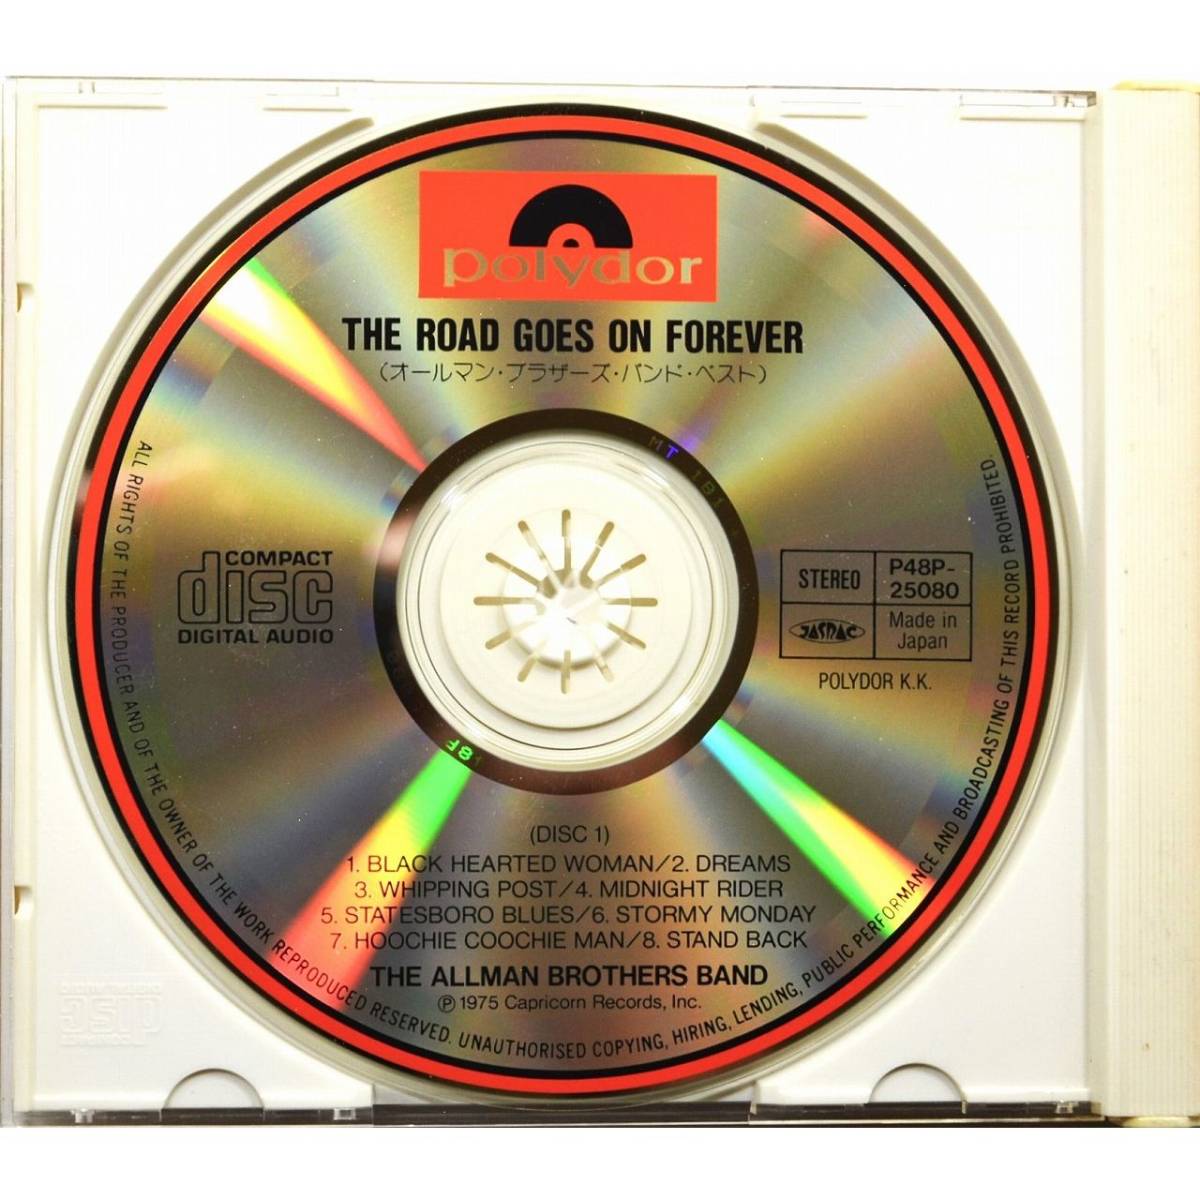 【2CD】The Allman Brothers Band / The Road Goes On Forever ◇ オールマン・ブラザーズ・バンド ◇ 栄光への道のり ◇ 国内盤 ◇_画像2